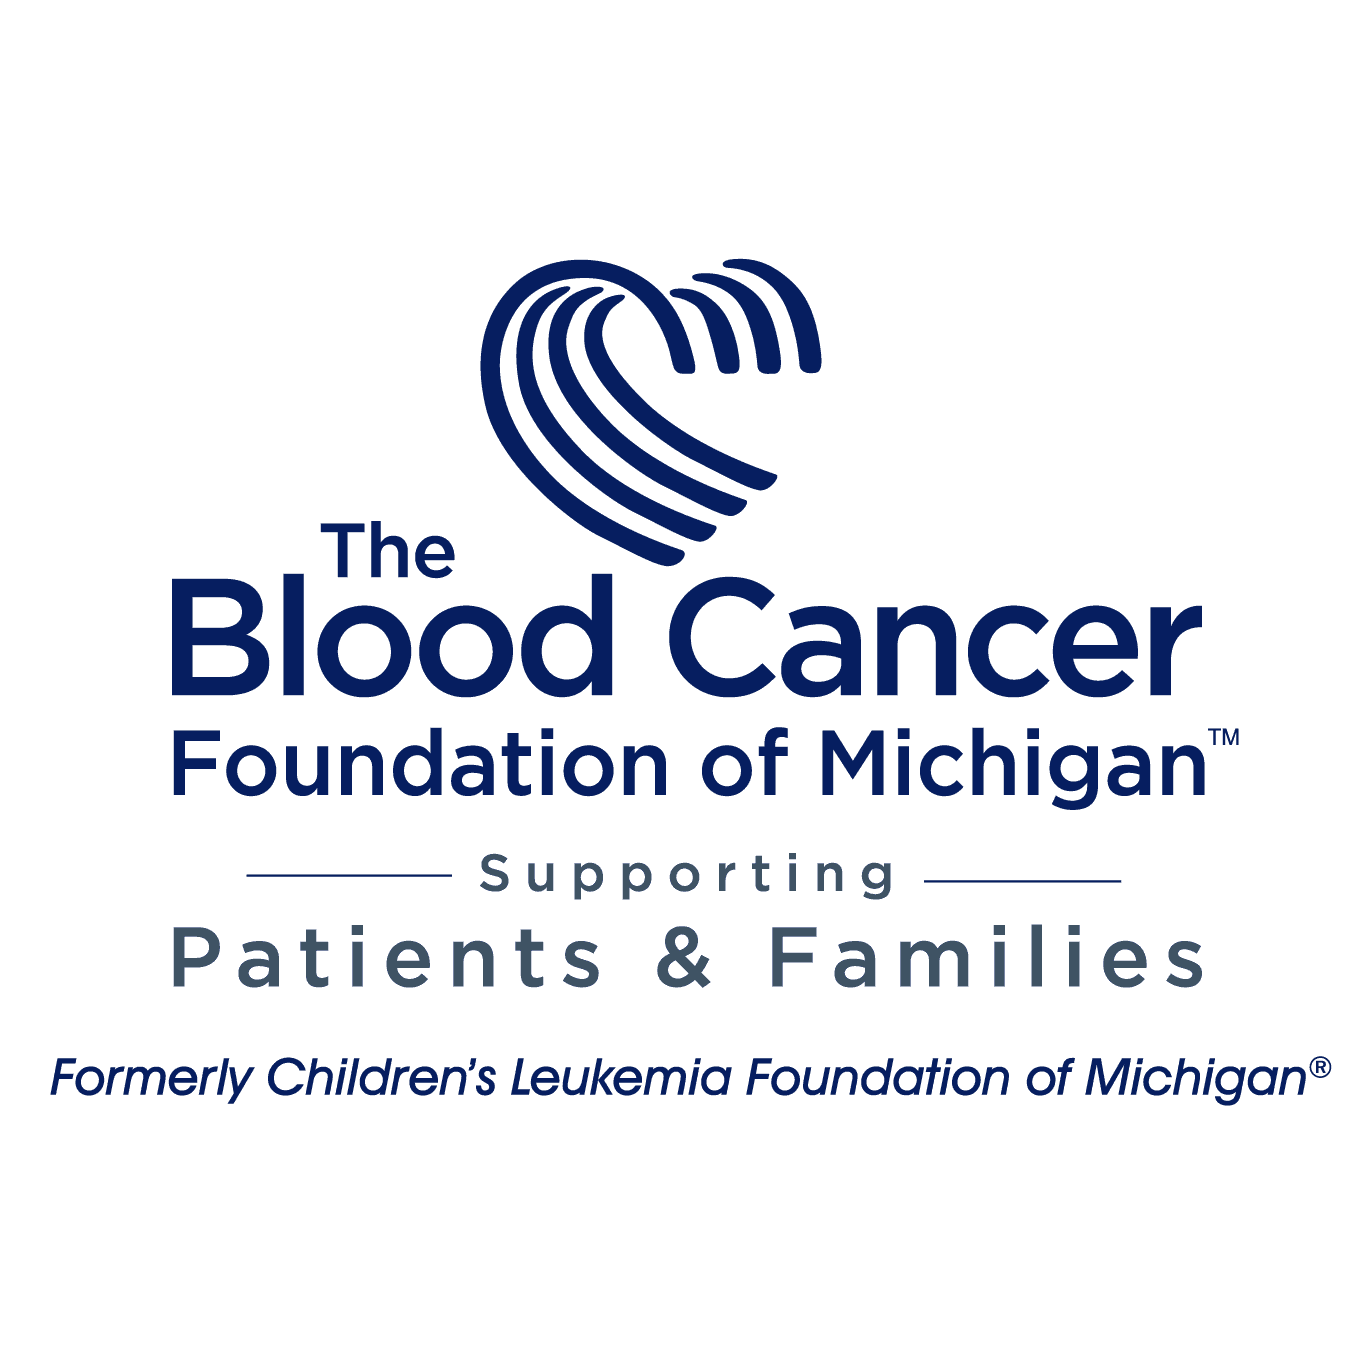 The Blood Cancer Foundation of Michigan's Logo